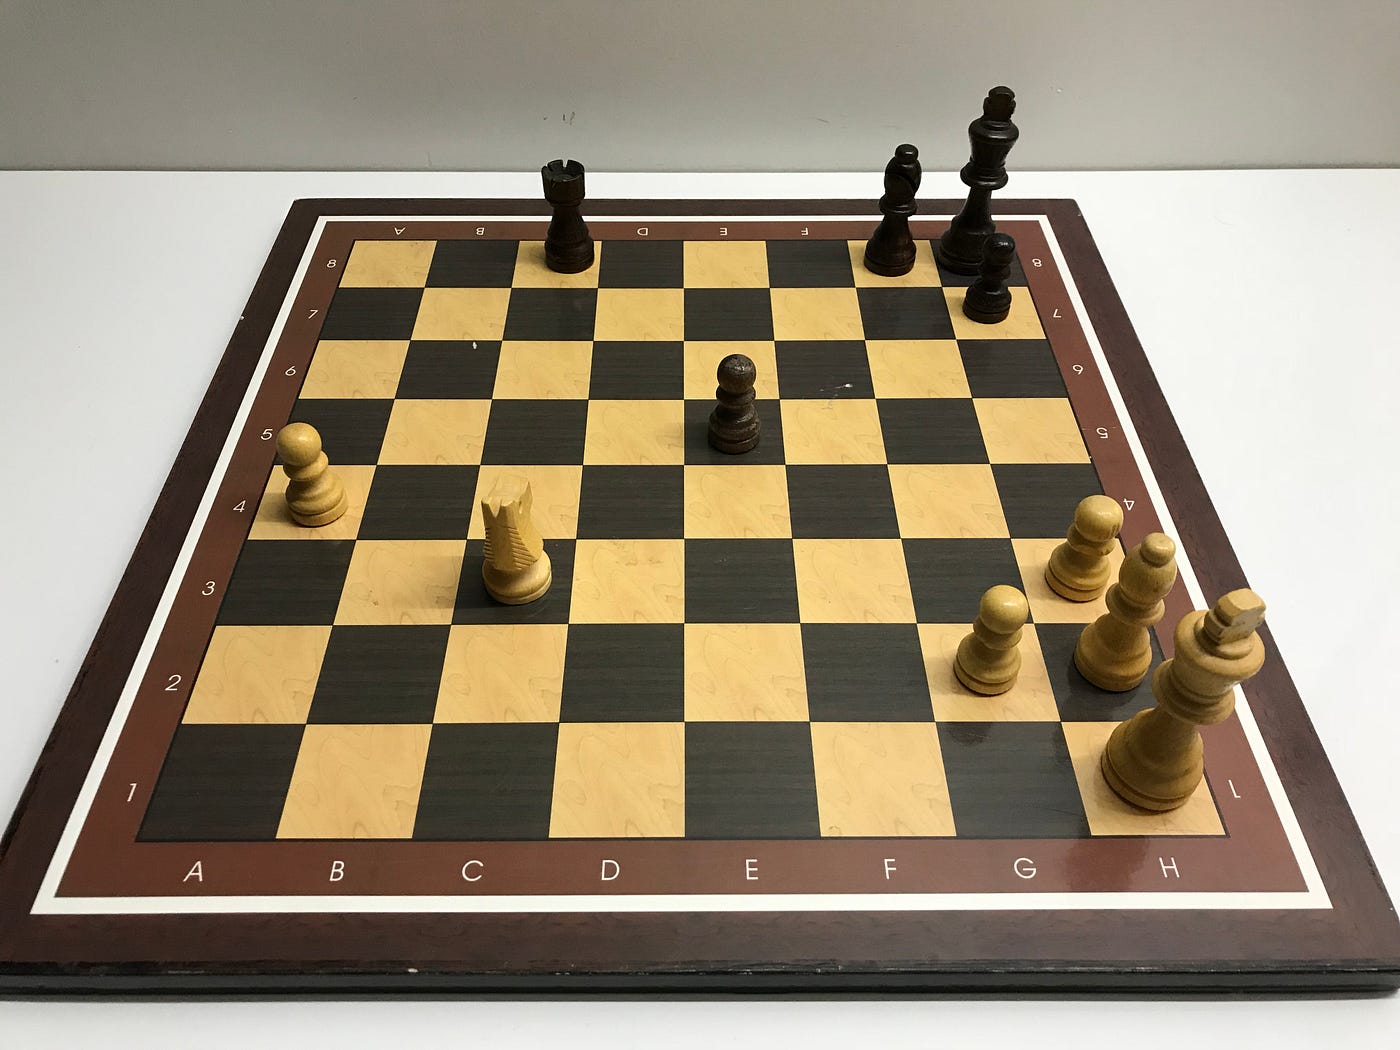 Put the black king on the board so that a) it's checkmate b